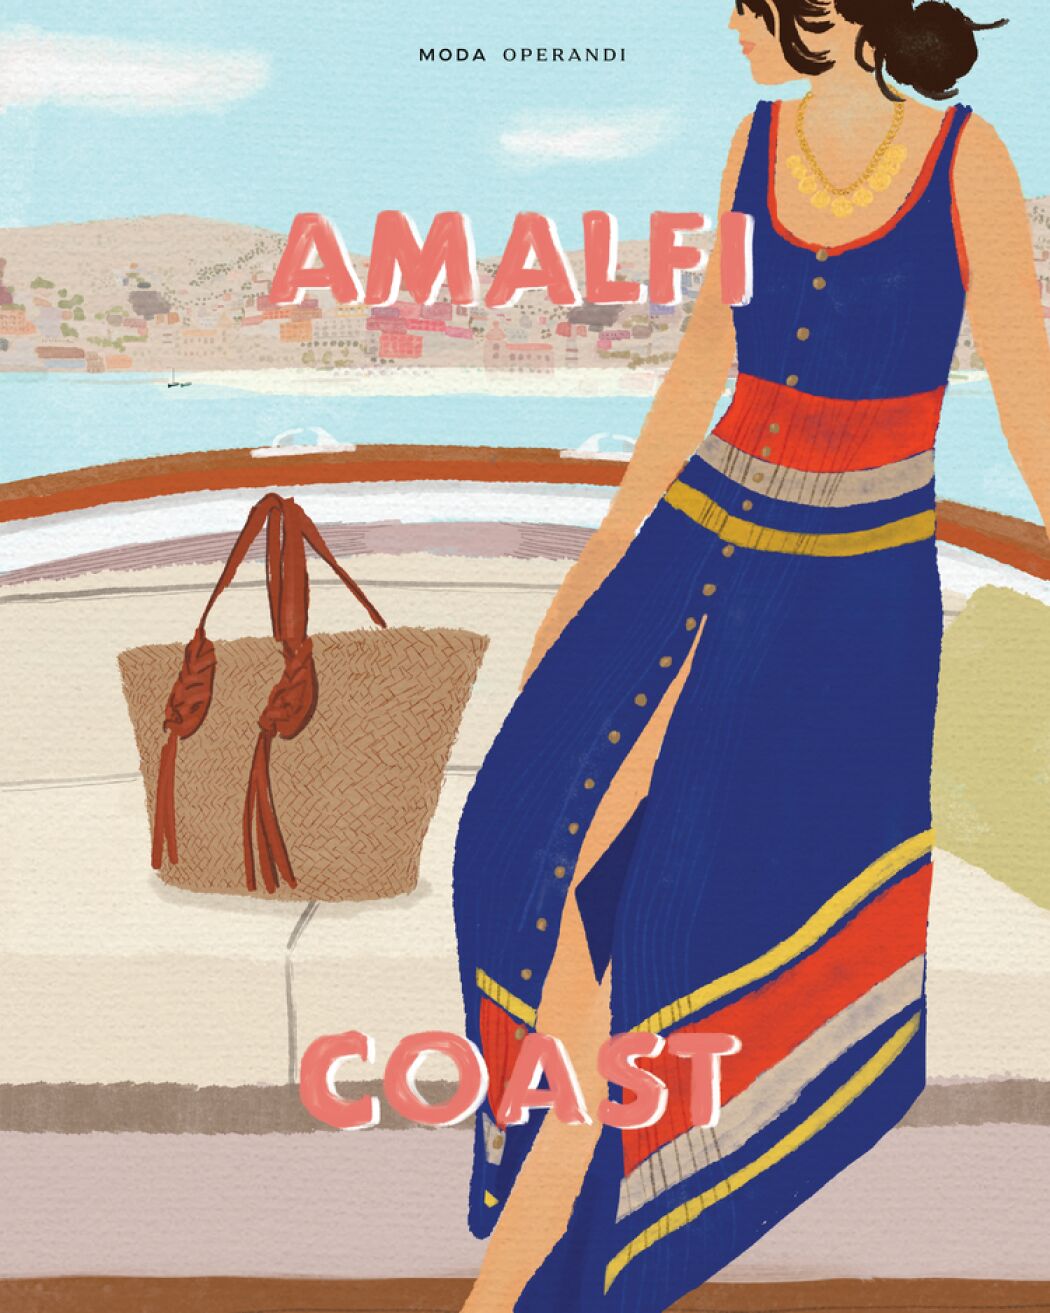 Retro style travel poster, illustration and graphic design by Christina Gliha